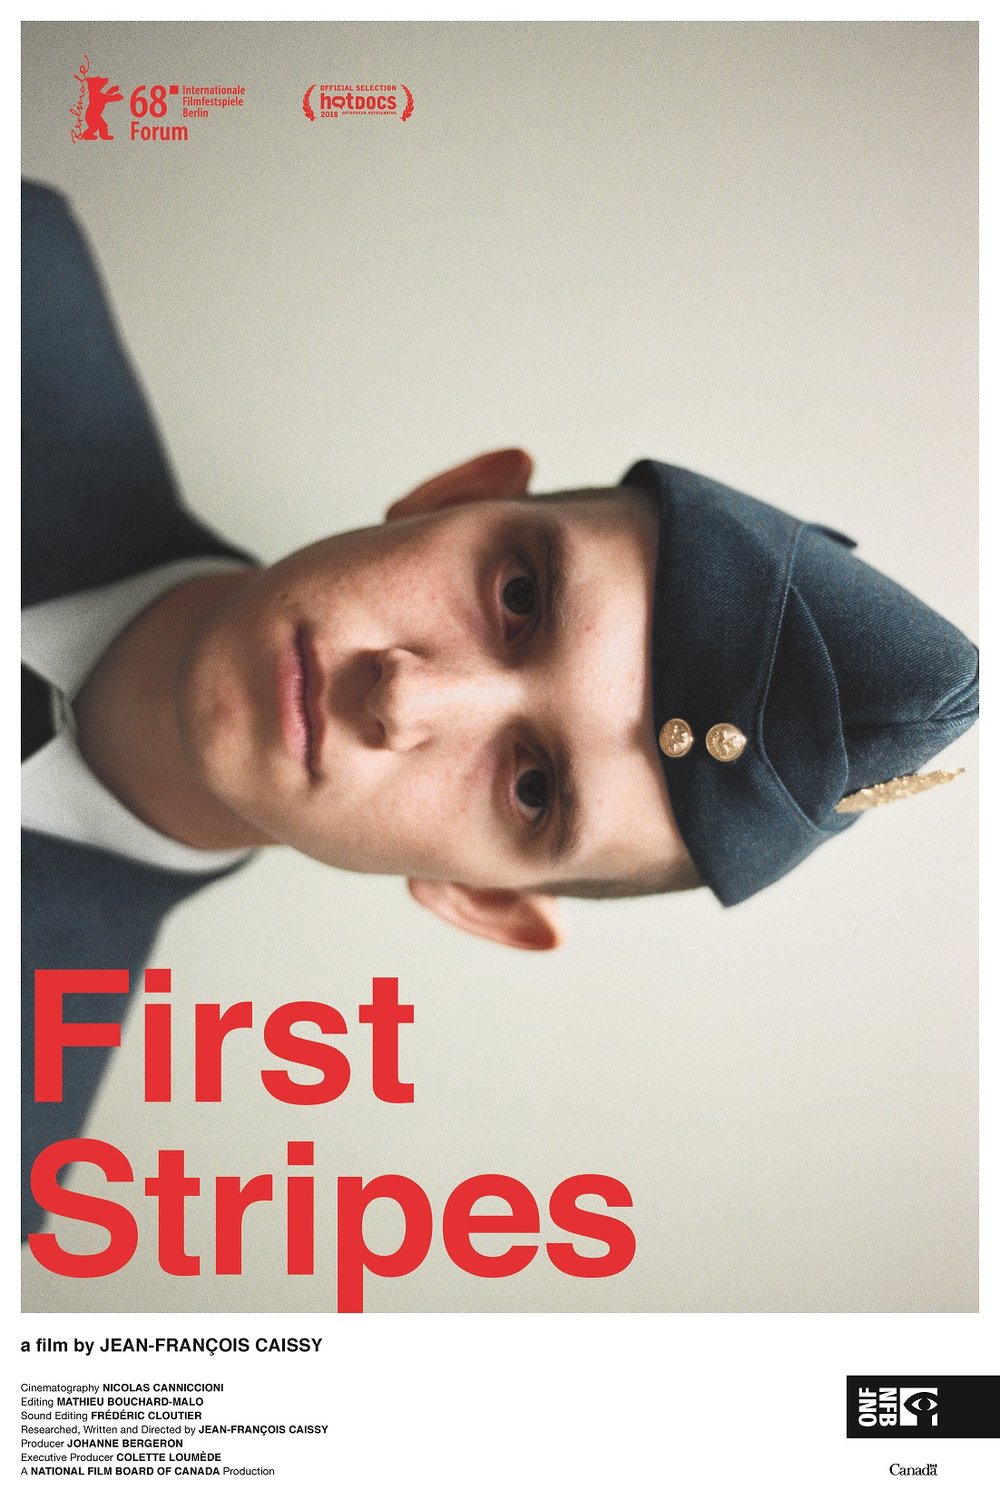 Poster of the movie First Stripes